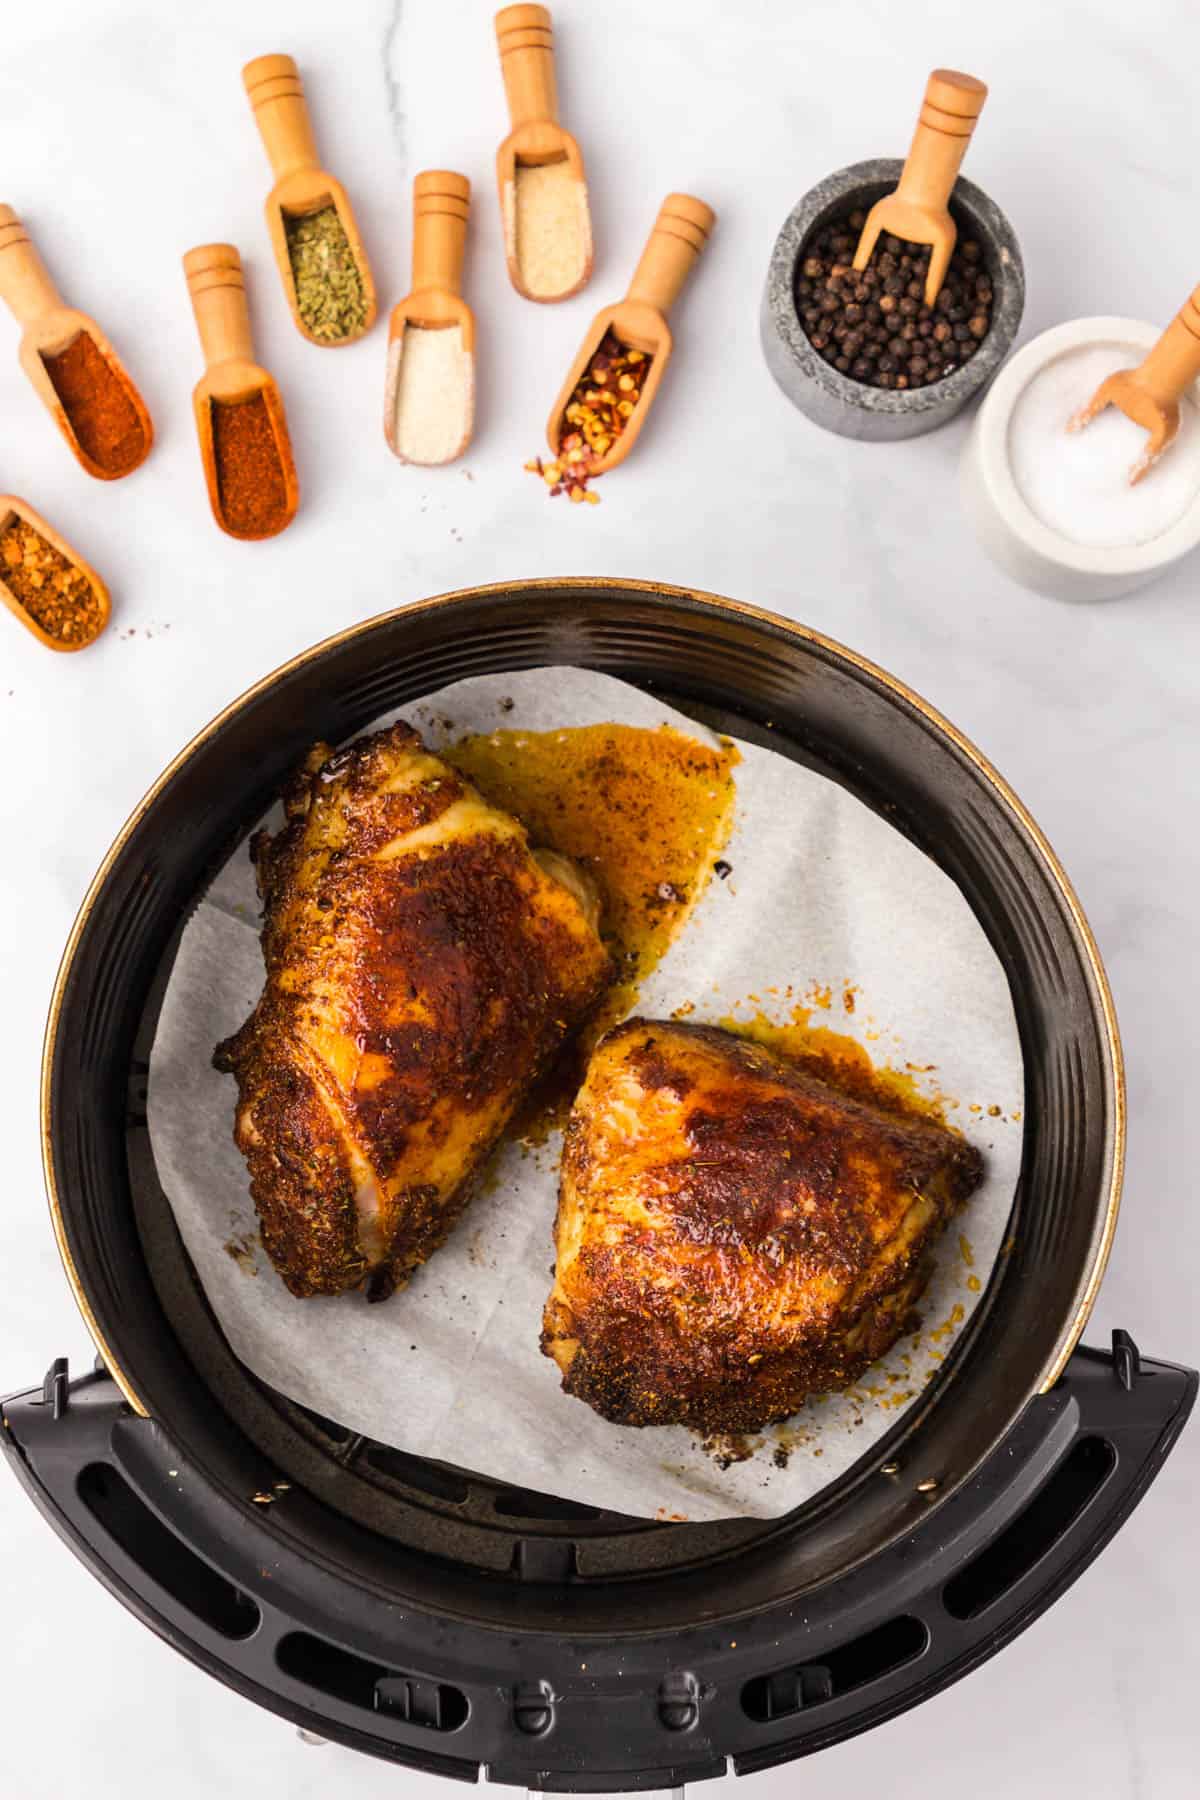 Top view of a basket of an air fryer with half cooked, coated chicken thighs in it, with small spice scoops with spices in them sitting in a row above the bowl.